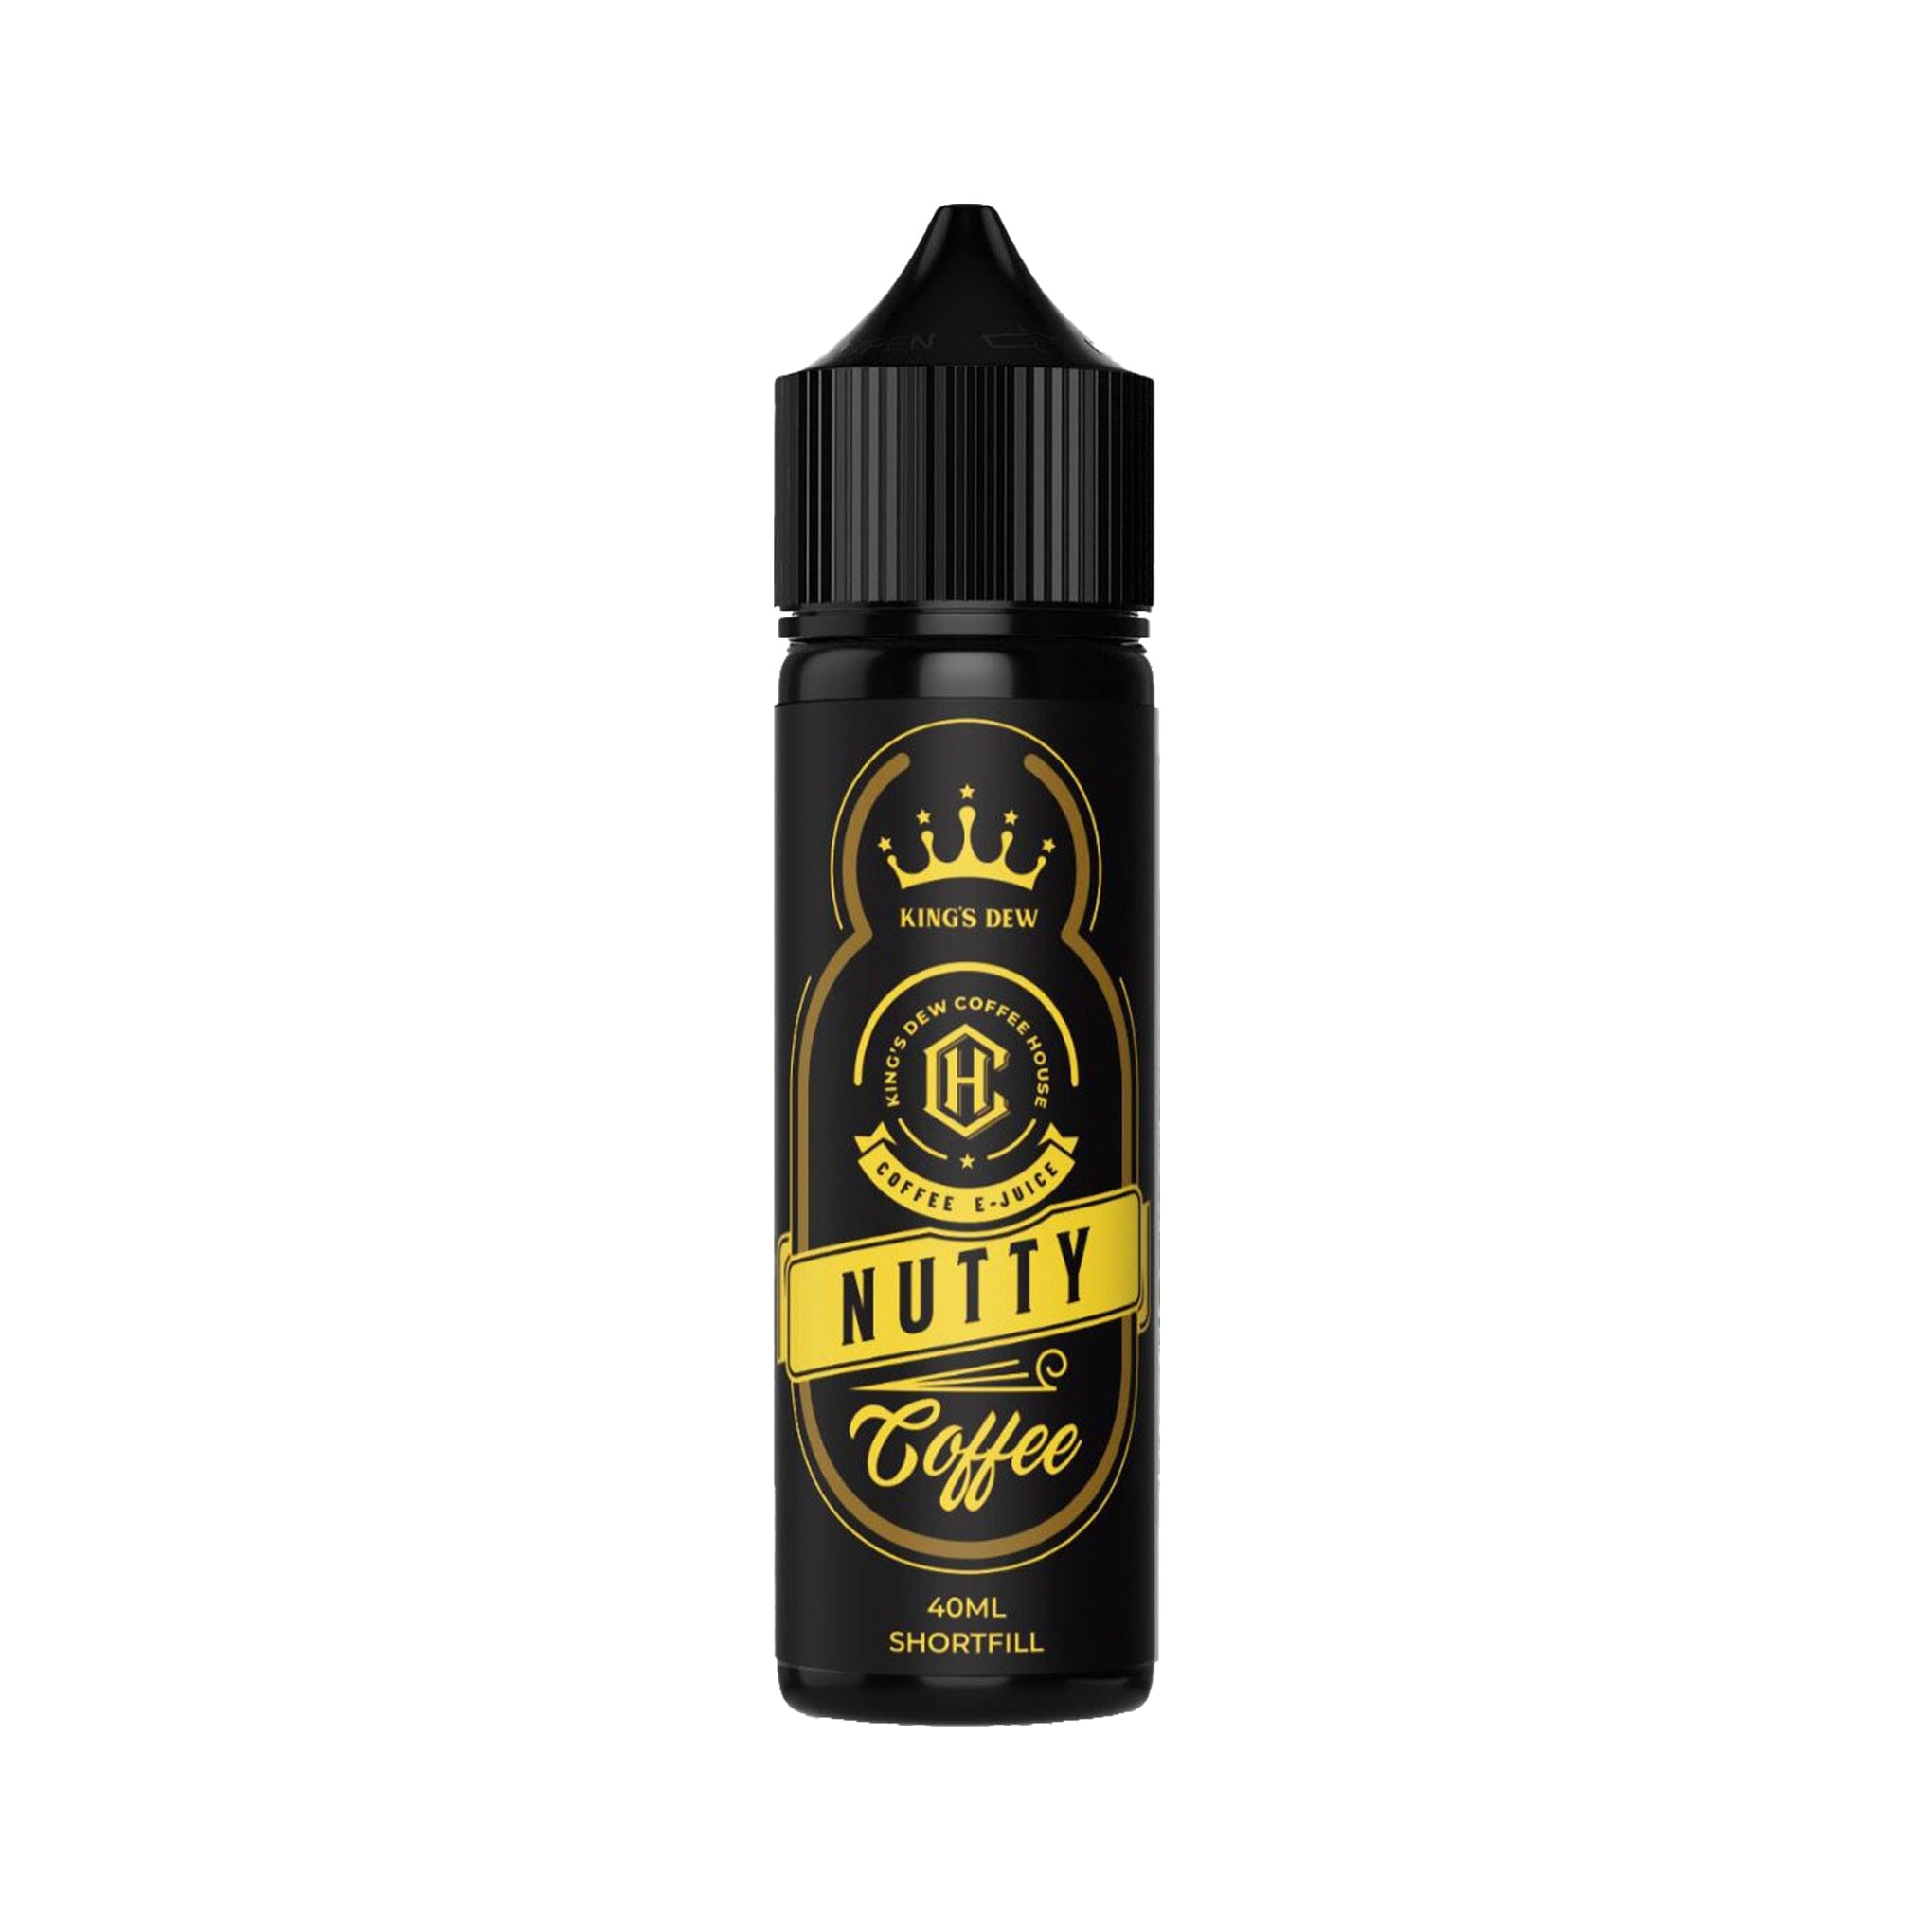 King's Dew Coffee House Short Fill E-Liquid Nutty 